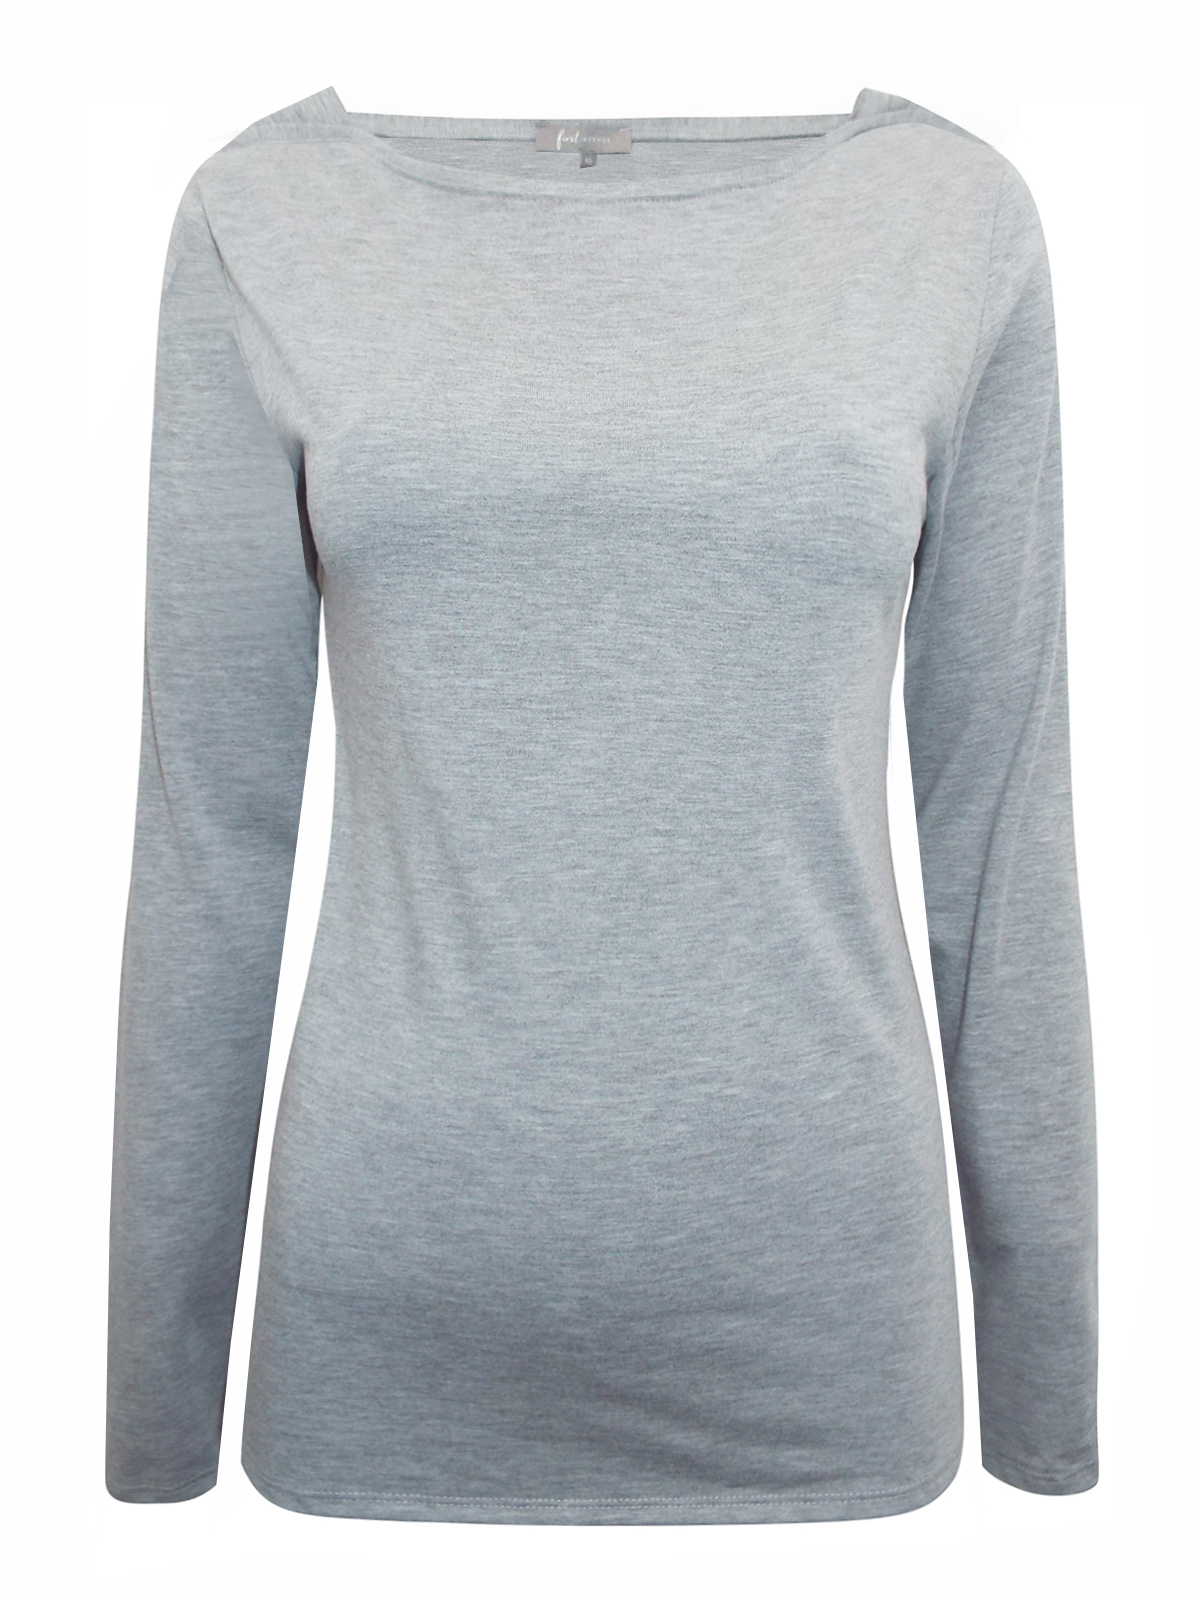 First Avenue GREY Slash Neck Jersey Top - Size 10 to 20